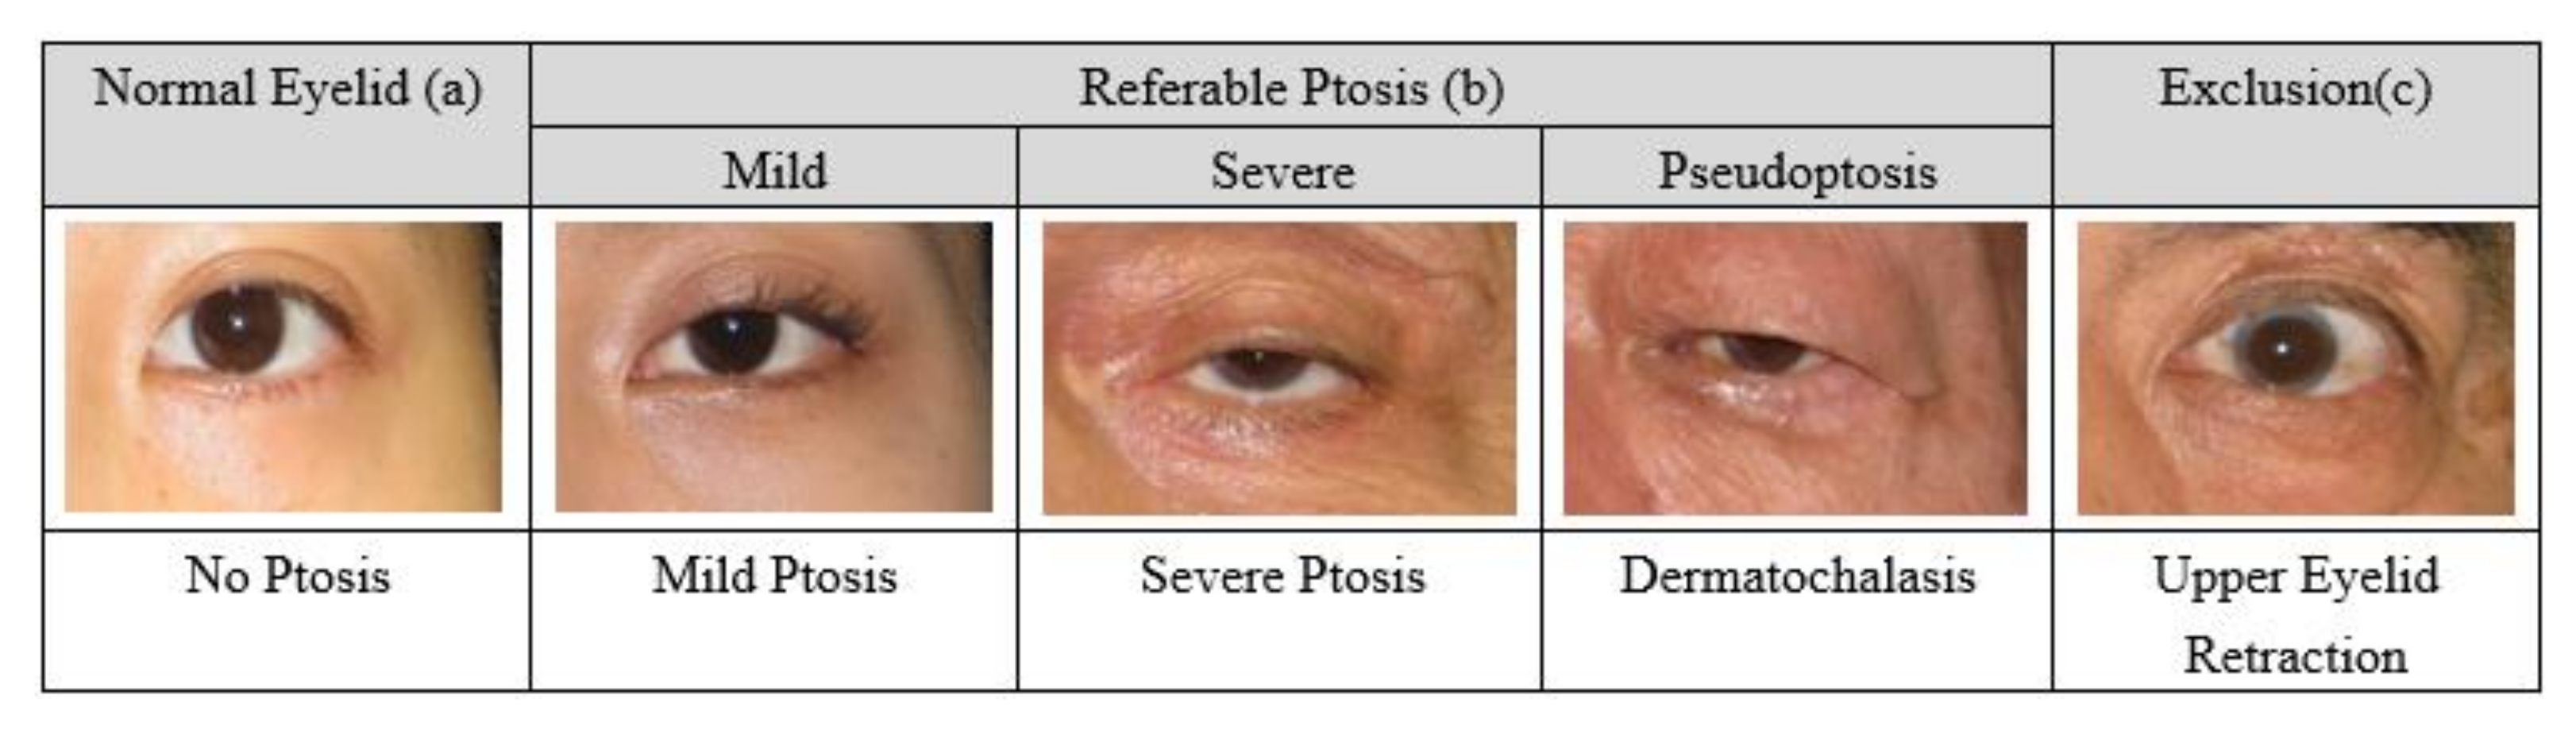 Regnault ptosis classification; (A) normal, (B) type 1: mild